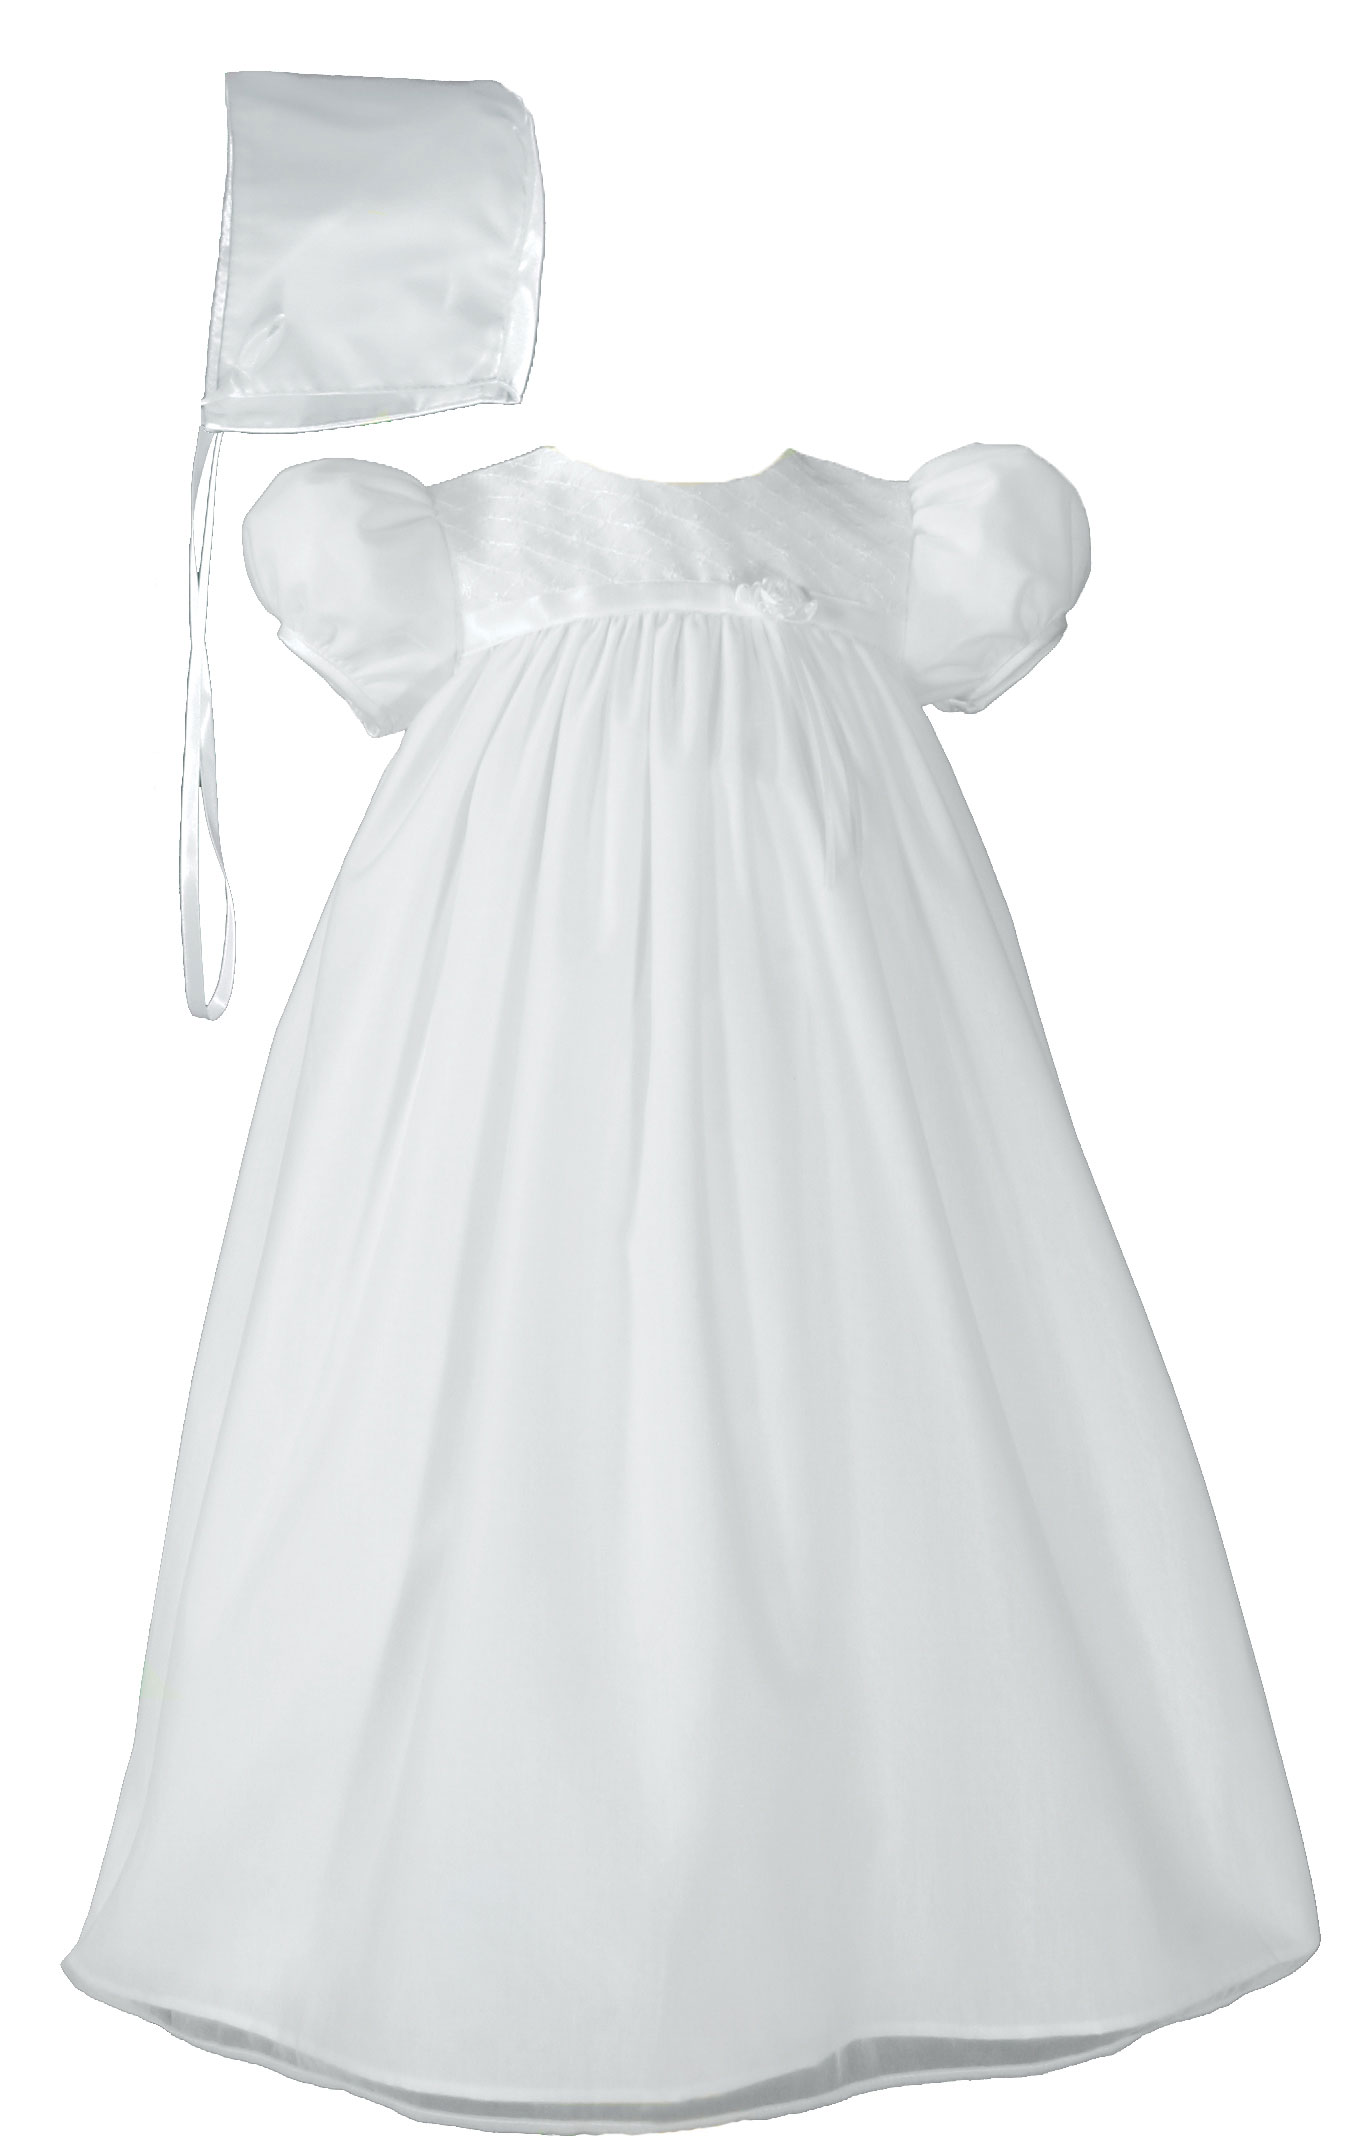 Baby Girls White Embroider Taffeta Christening Dress - Little Things Mean a Lot